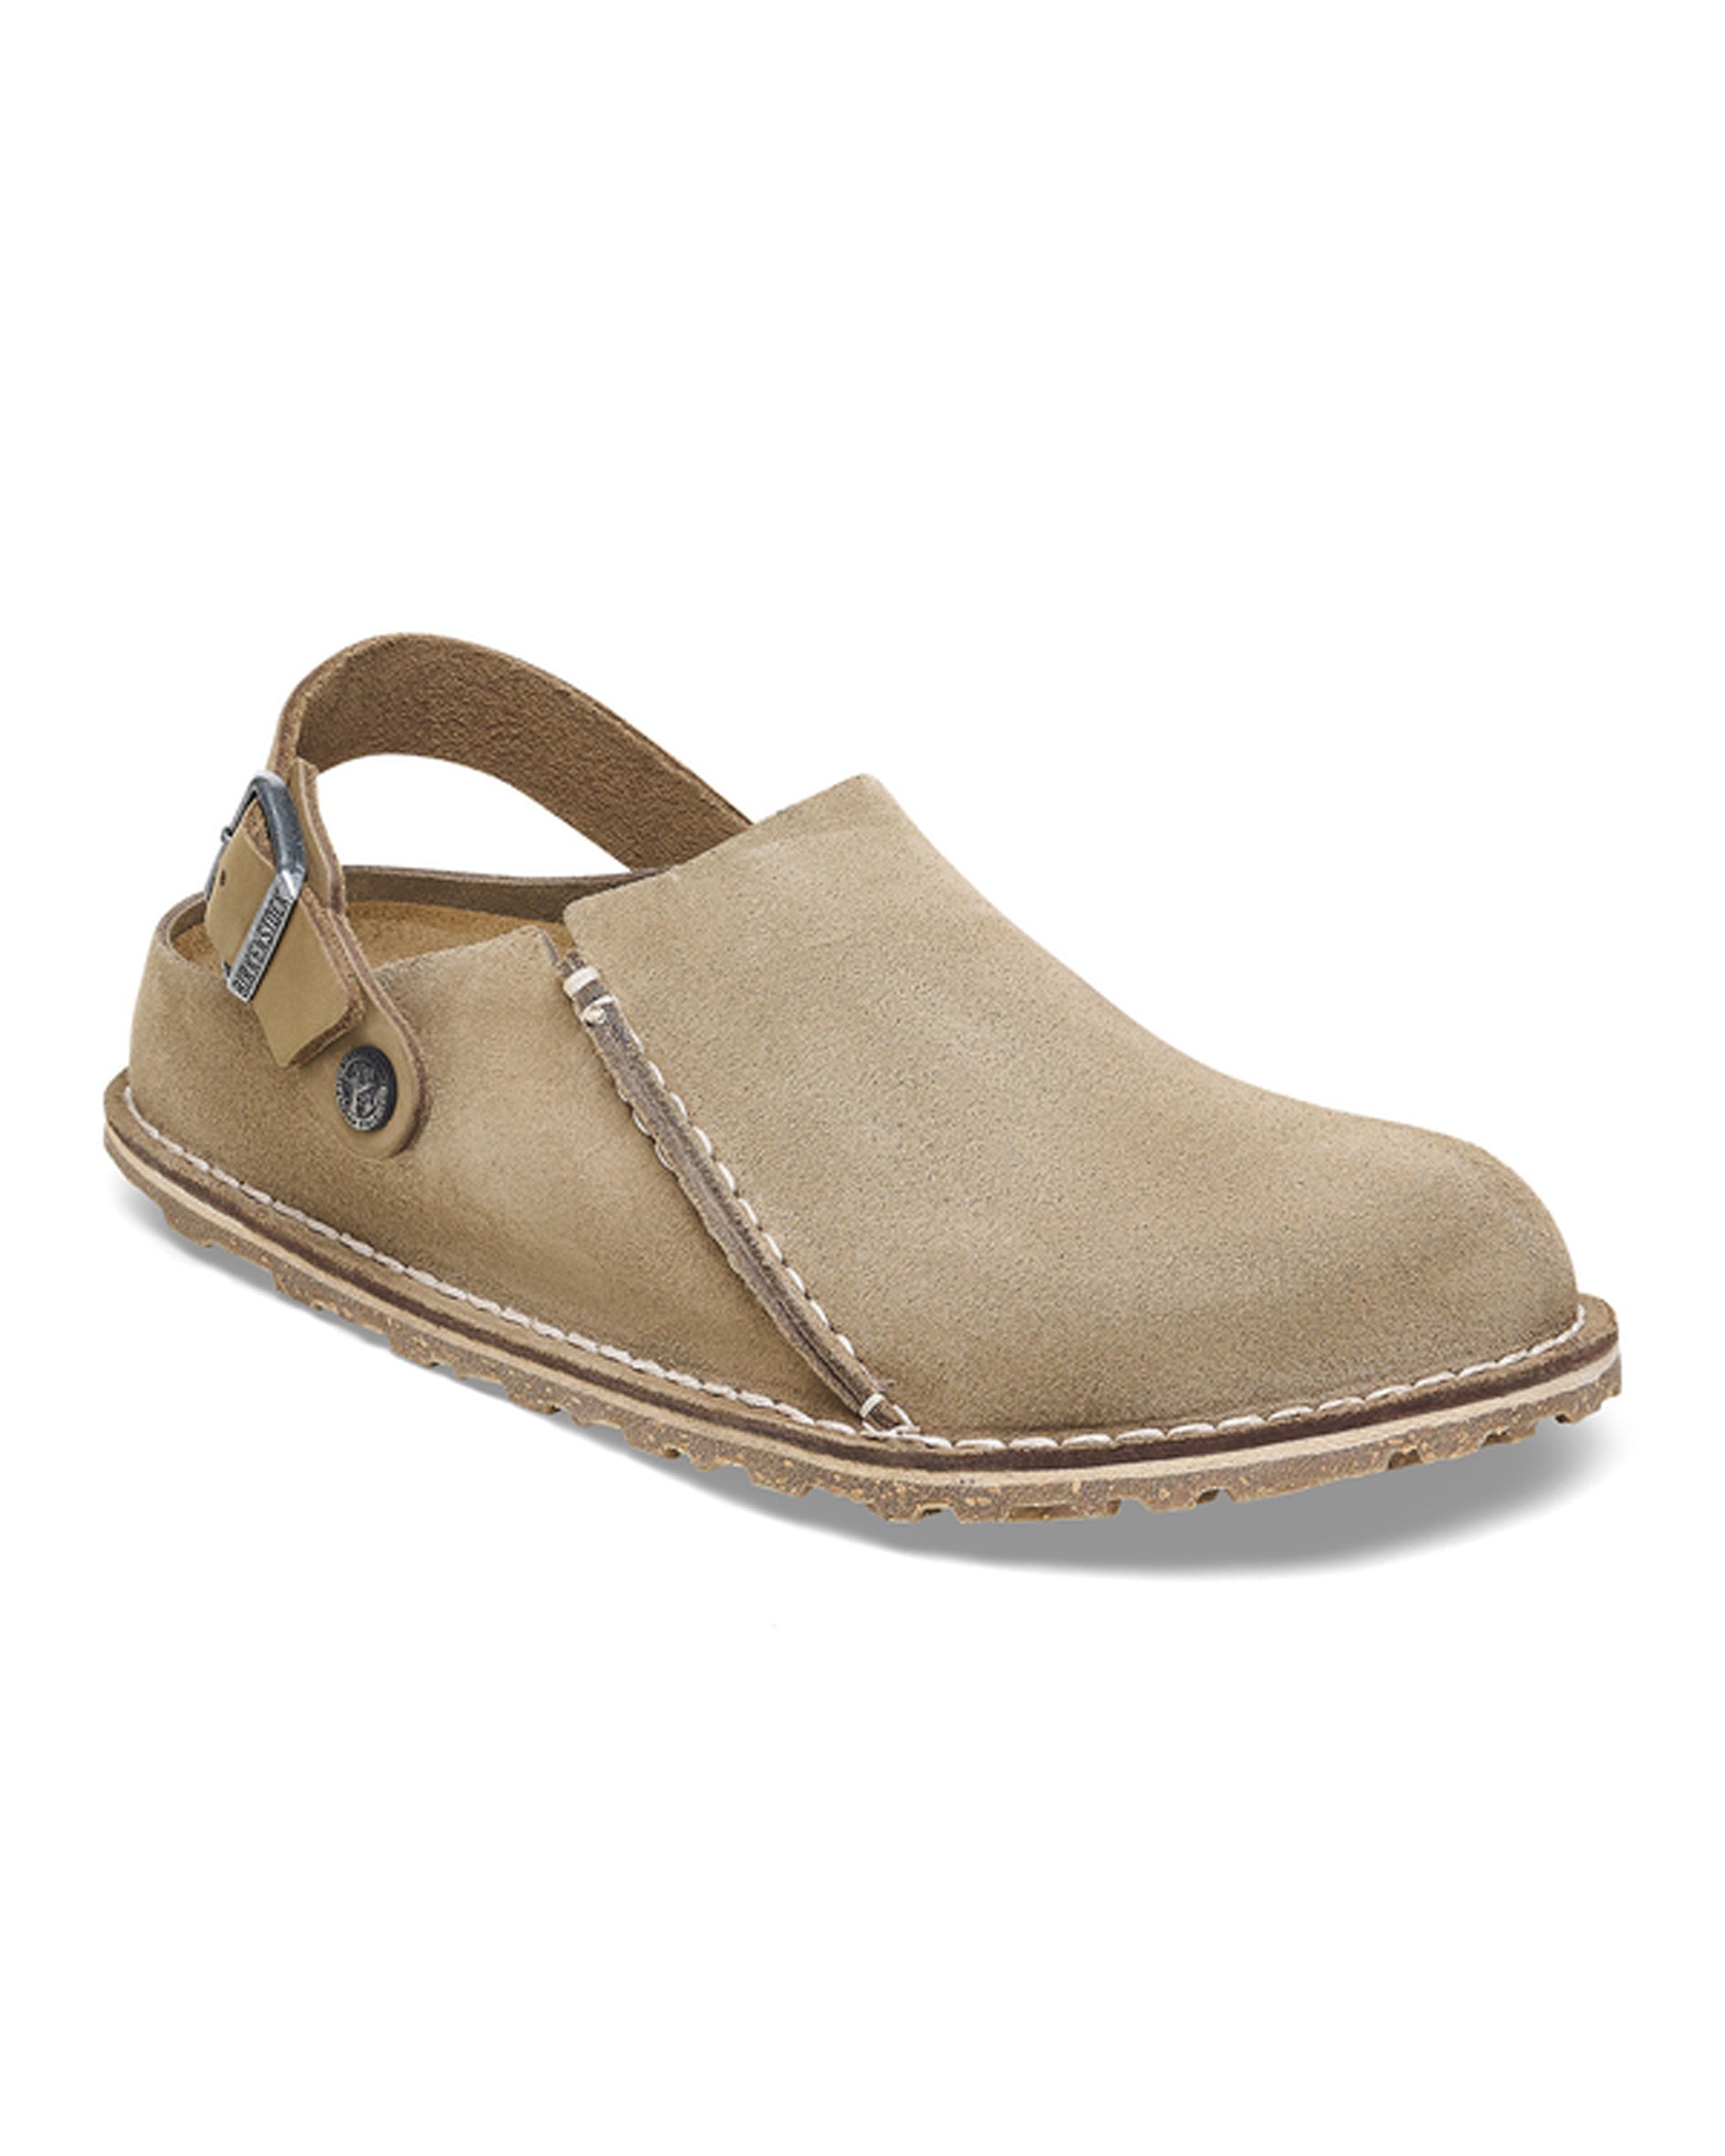 Lutry Premium Grey Taupe Suede Leather Clogs